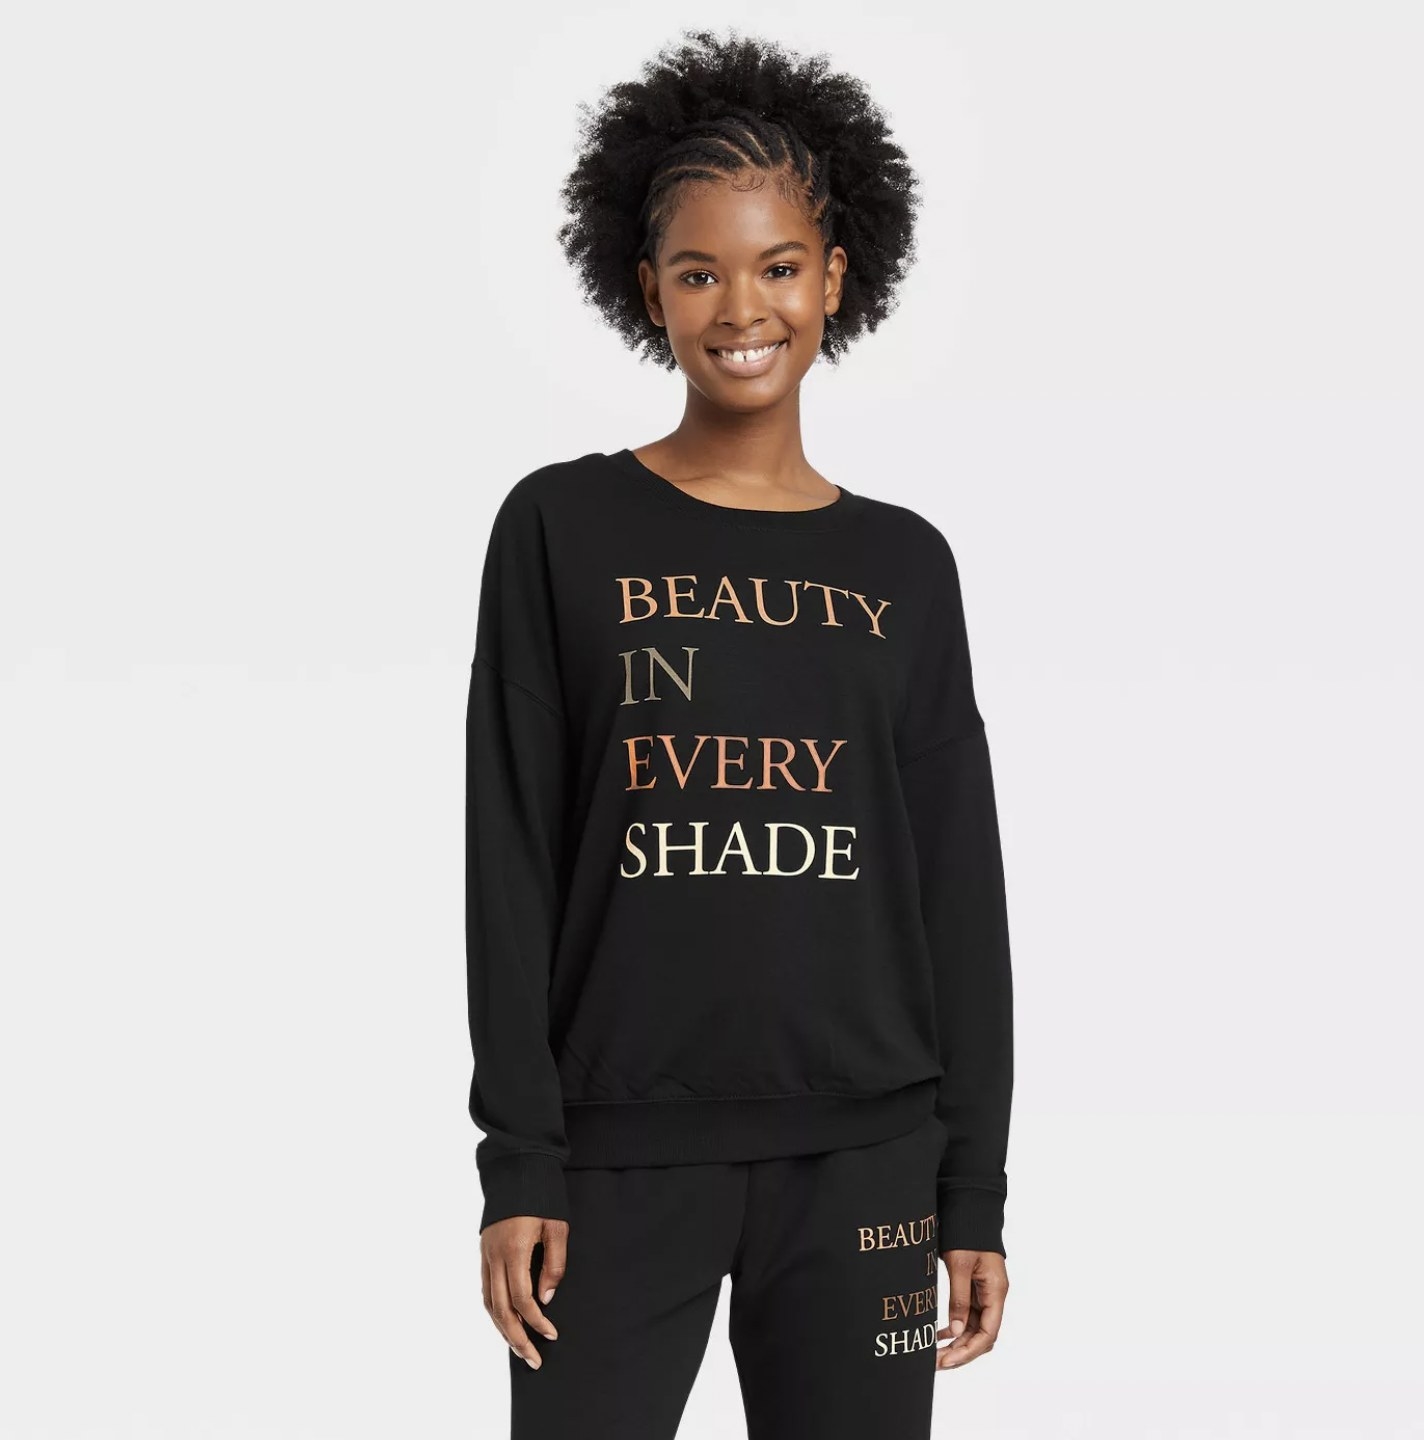 Model in the black crewneck sweatshirt with the message in colored capital letters